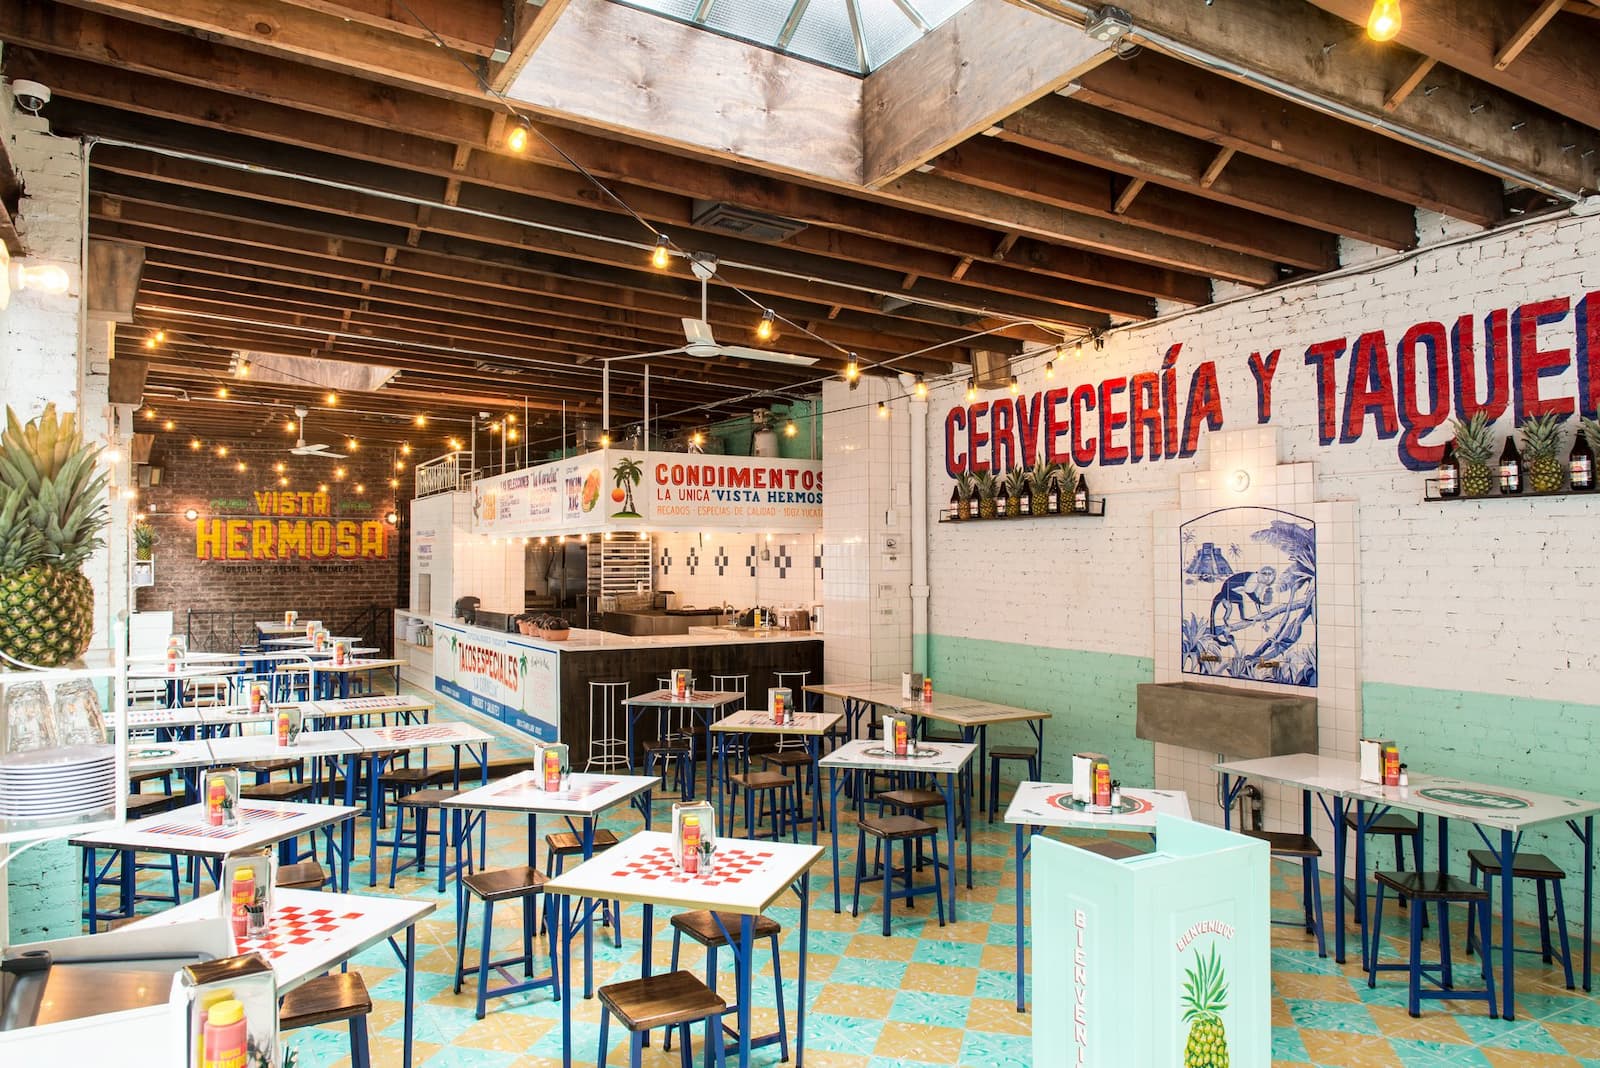 Tacombi expands to its third taqueria in Wynwood, Miami - The Miami Guide